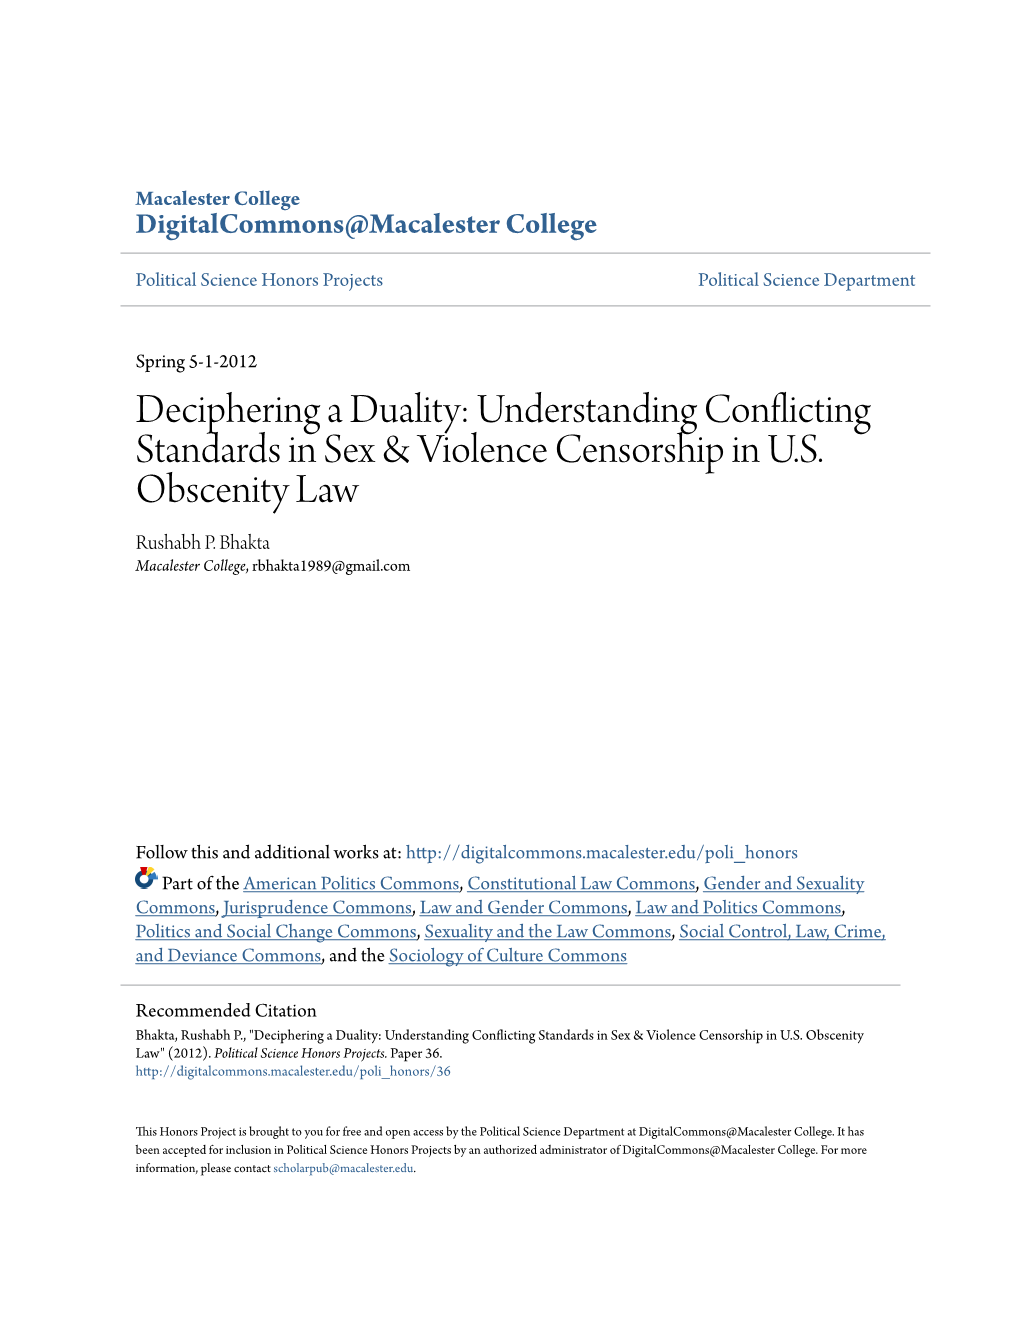 Deciphering a Duality: Understanding Conflicting Standards in Sex & Violence Censorship in U.S. Obscenity